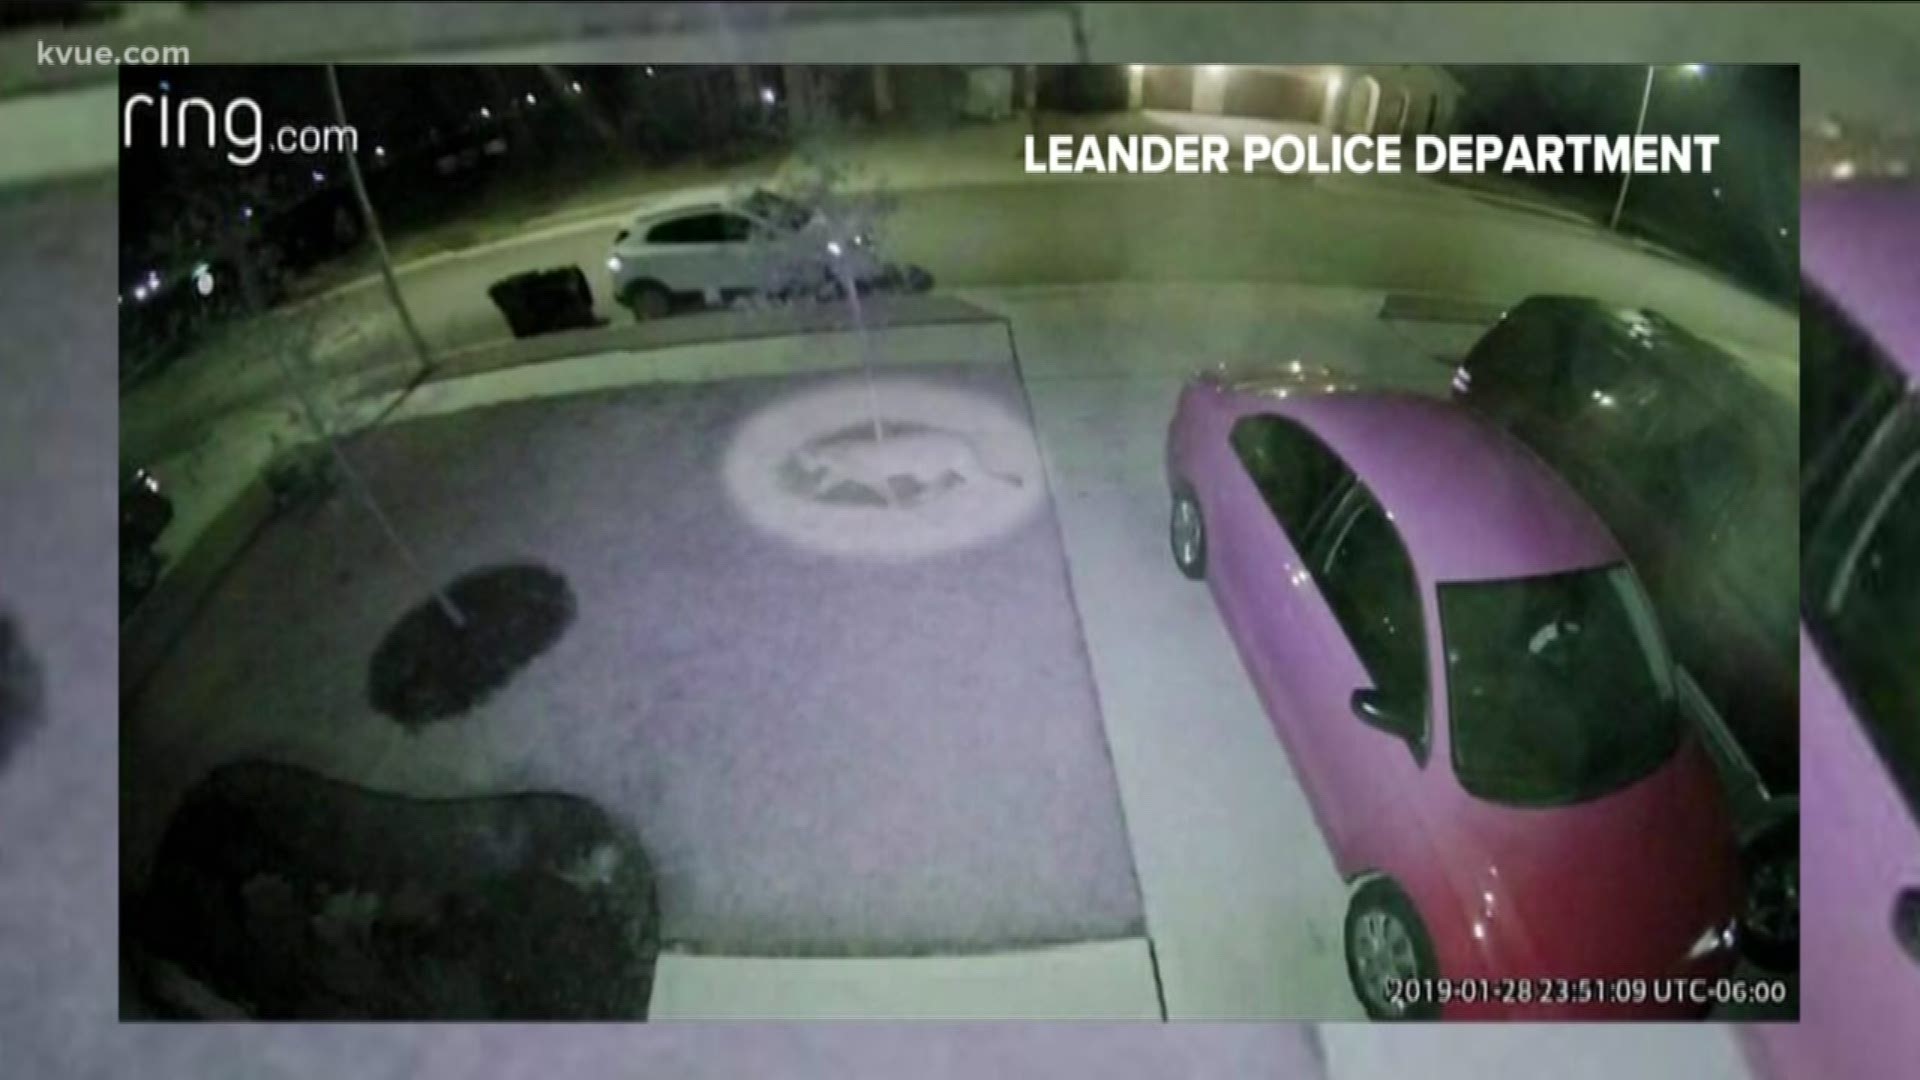 Leander police are providing a few safety tips after a cougar was spotted in a residential neighborhood.